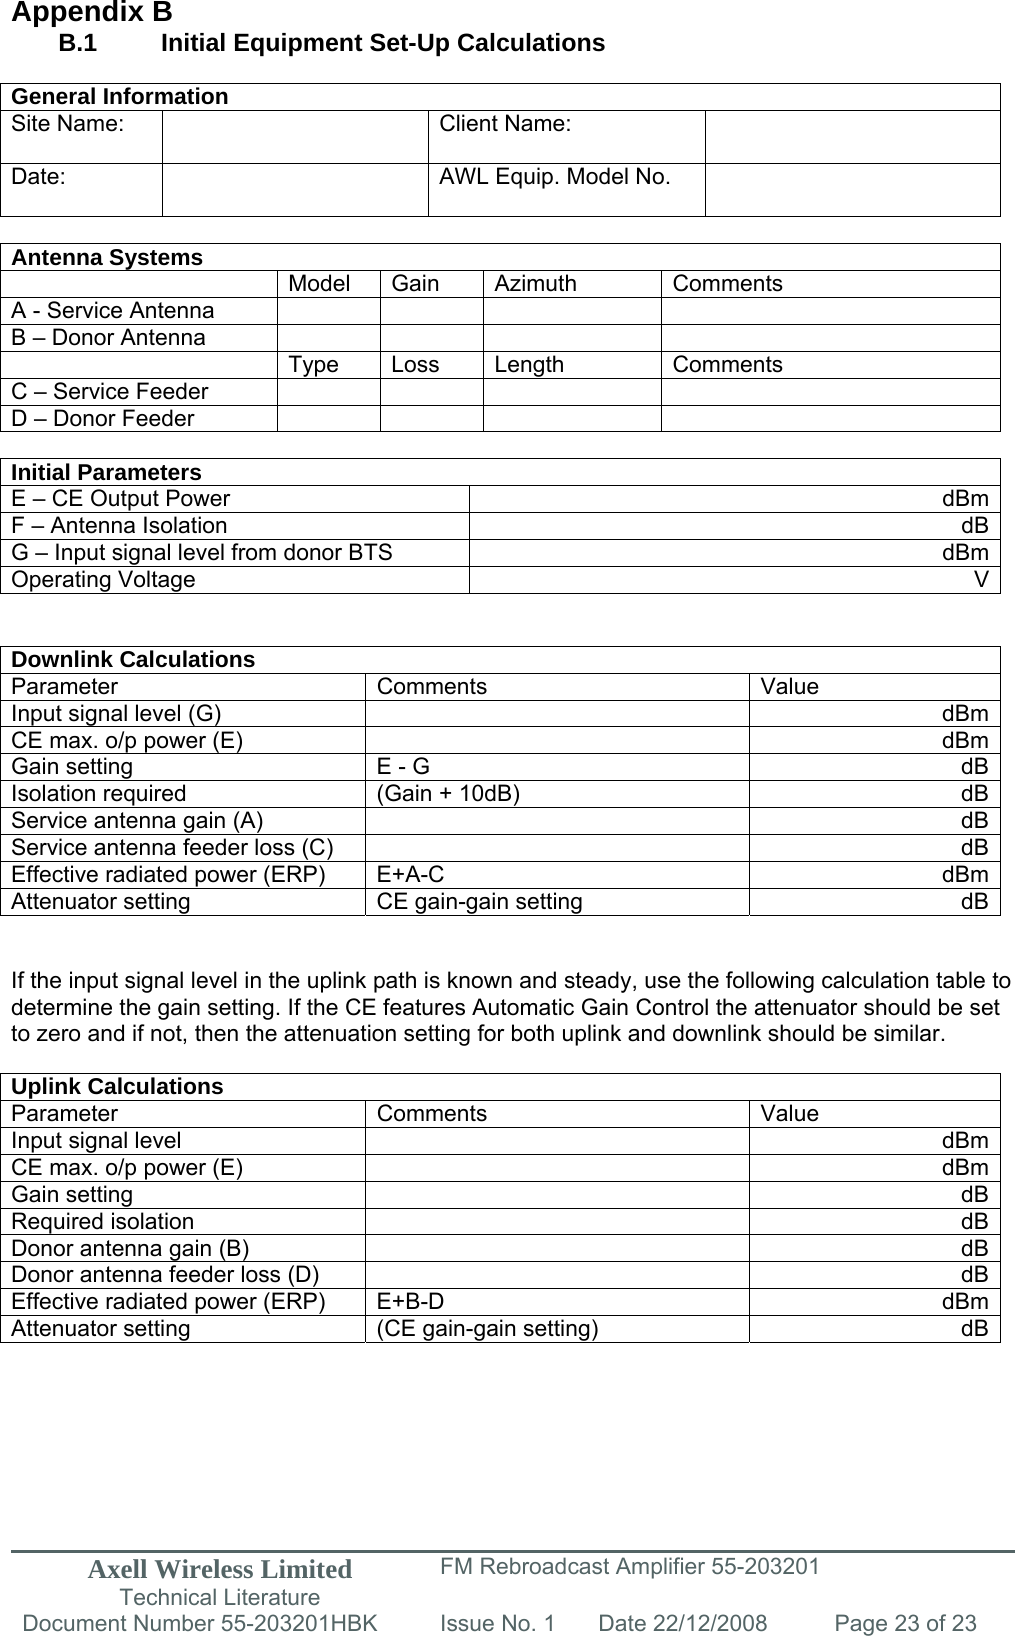 Axell Wireless Limited Technical Literature FM Rebroadcast Amplifier 55-203201 Document Number 55-203201HBK Issue No. 1  Date 22/12/2008  Page 23 of 23   Appendix B B.1   Initial Equipment Set-Up Calculations  General Information Site Name:    Client Name:   Date:   AWL Equip. Model No.    Antenna Systems  Model Gain Azimuth Comments A - Service Antenna         B – Donor Antenna          Type Loss Length Comments C – Service Feeder         D – Donor Feeder          Initial Parameters E – CE Output Power  dBmF – Antenna Isolation  dBG – Input signal level from donor BTS  dBmOperating Voltage  V  Downlink Calculations Parameter Comments  Value Input signal level (G)    dBmCE max. o/p power (E)    dBmGain setting  E - G  dBIsolation required  (Gain + 10dB)  dBService antenna gain (A)    dBService antenna feeder loss (C)    dBEffective radiated power (ERP)  E+A-C  dBmAttenuator setting  CE gain-gain setting  dB  If the input signal level in the uplink path is known and steady, use the following calculation table to determine the gain setting. If the CE features Automatic Gain Control the attenuator should be set to zero and if not, then the attenuation setting for both uplink and downlink should be similar.  Uplink Calculations Parameter Comments  Value Input signal level    dBmCE max. o/p power (E)    dBmGain setting    dBRequired isolation    dBDonor antenna gain (B)    dBDonor antenna feeder loss (D)    dBEffective radiated power (ERP)  E+B-D  dBmAttenuator setting  (CE gain-gain setting)  dB       